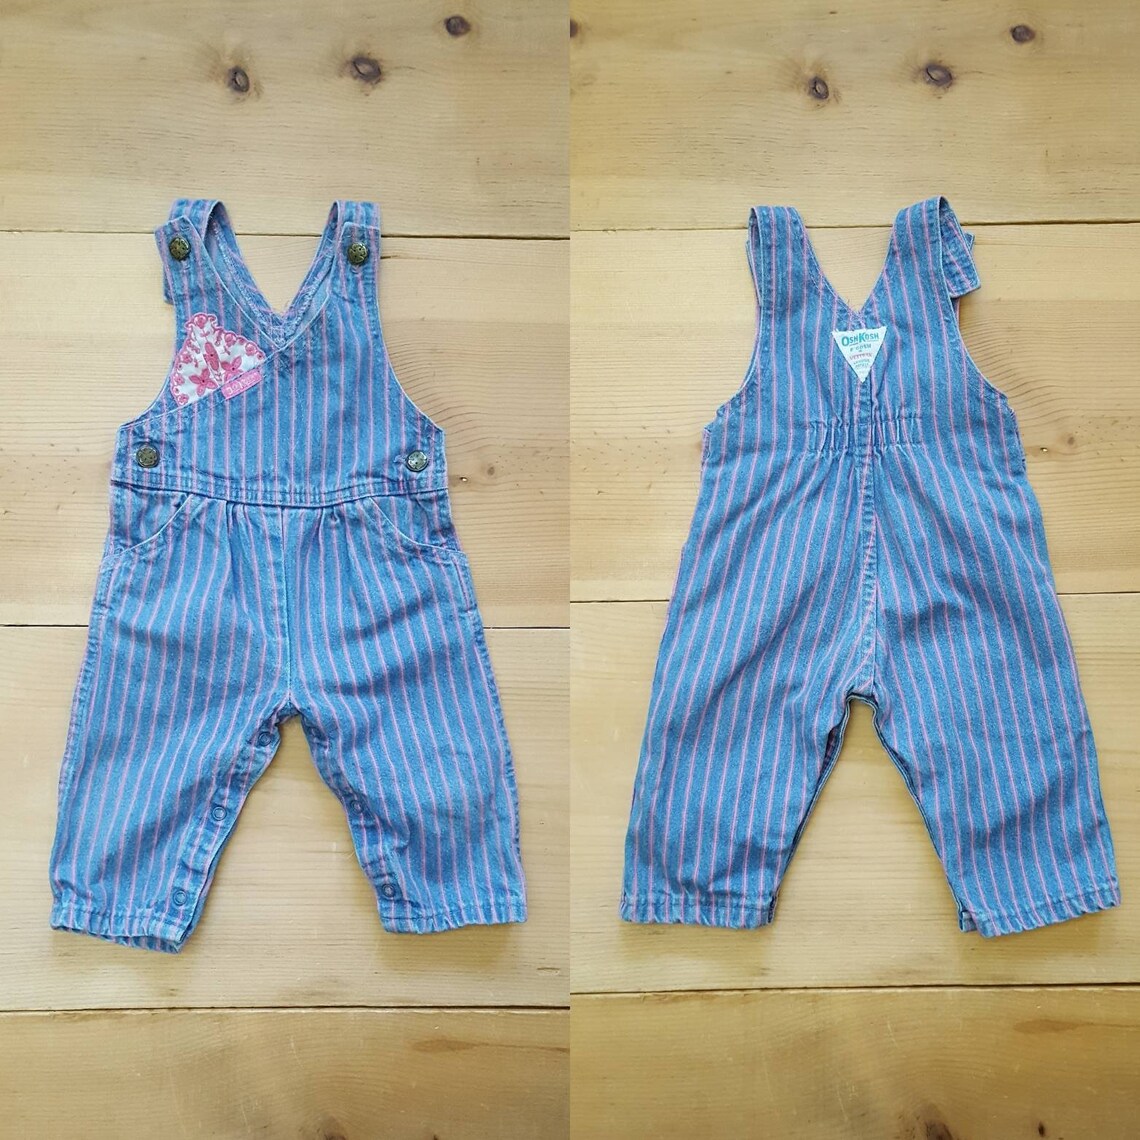 Vintage Oshkosh Baby Overalls // Made in the USA Distressed | Etsy